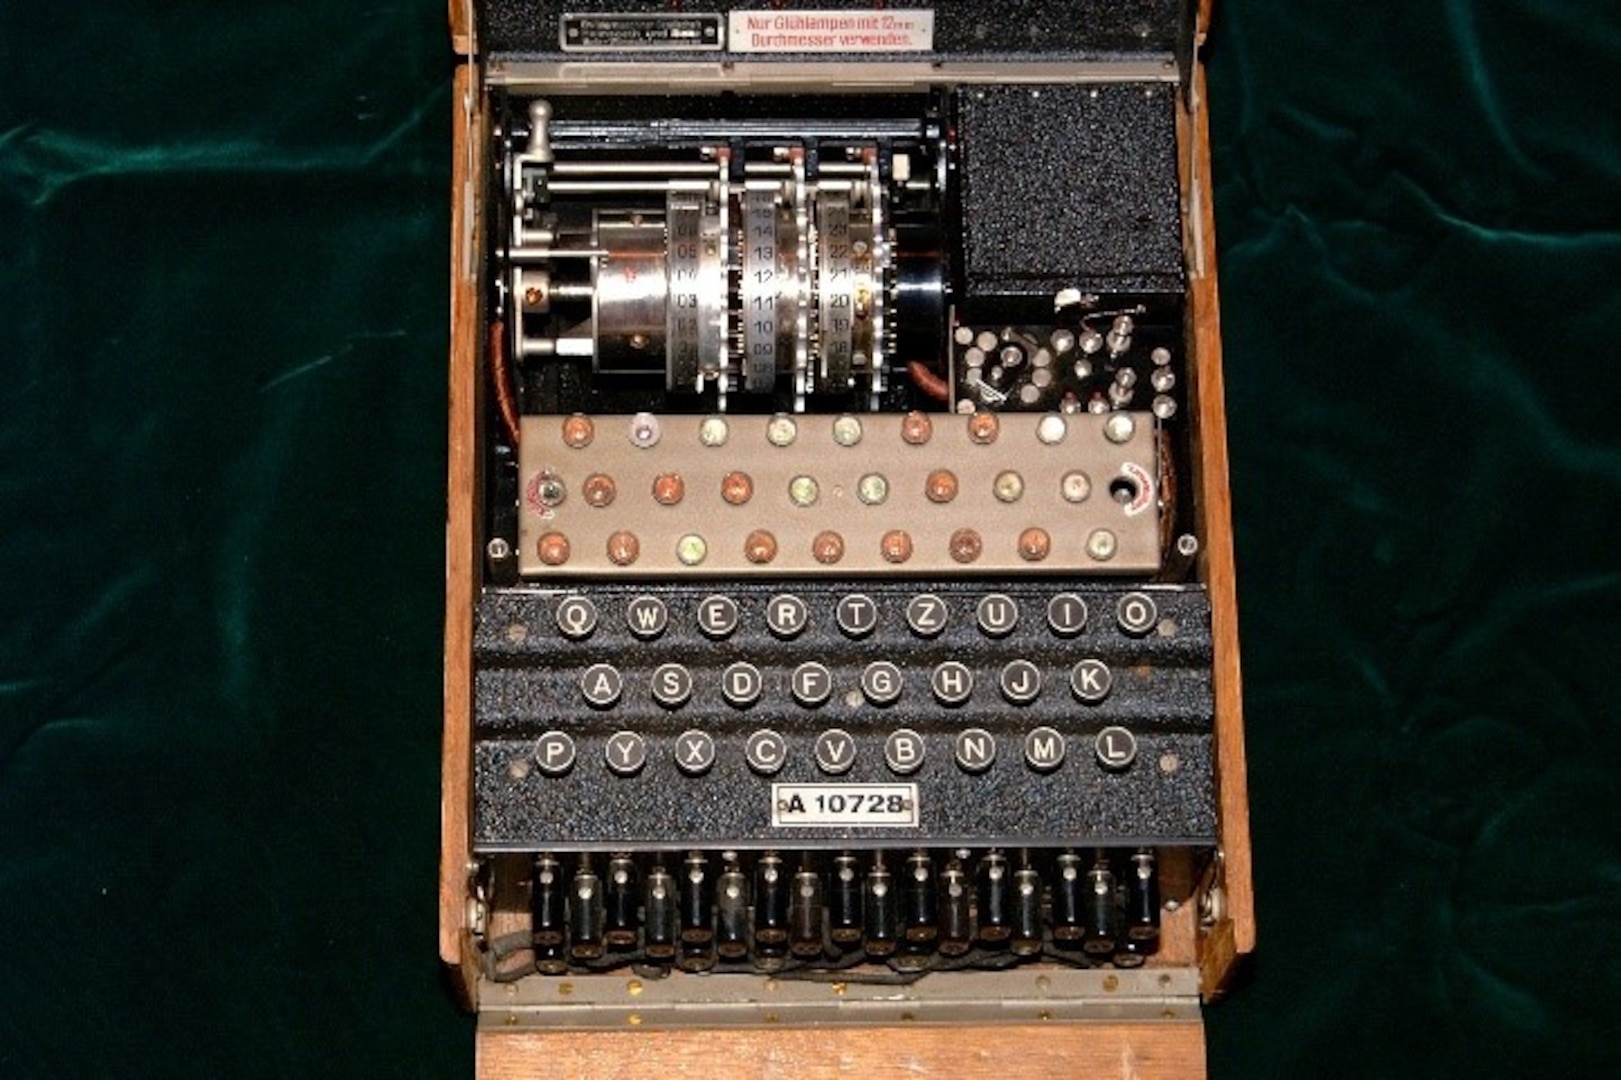 A German Enigma cipher machine, like the one pictured, is one of 20 artifacts that the National Cryptologic Museum has loaned to the Ronald Reagan Presidential Library and Museum for its “Secrets of WWII” temporary exhibit taking place through October.